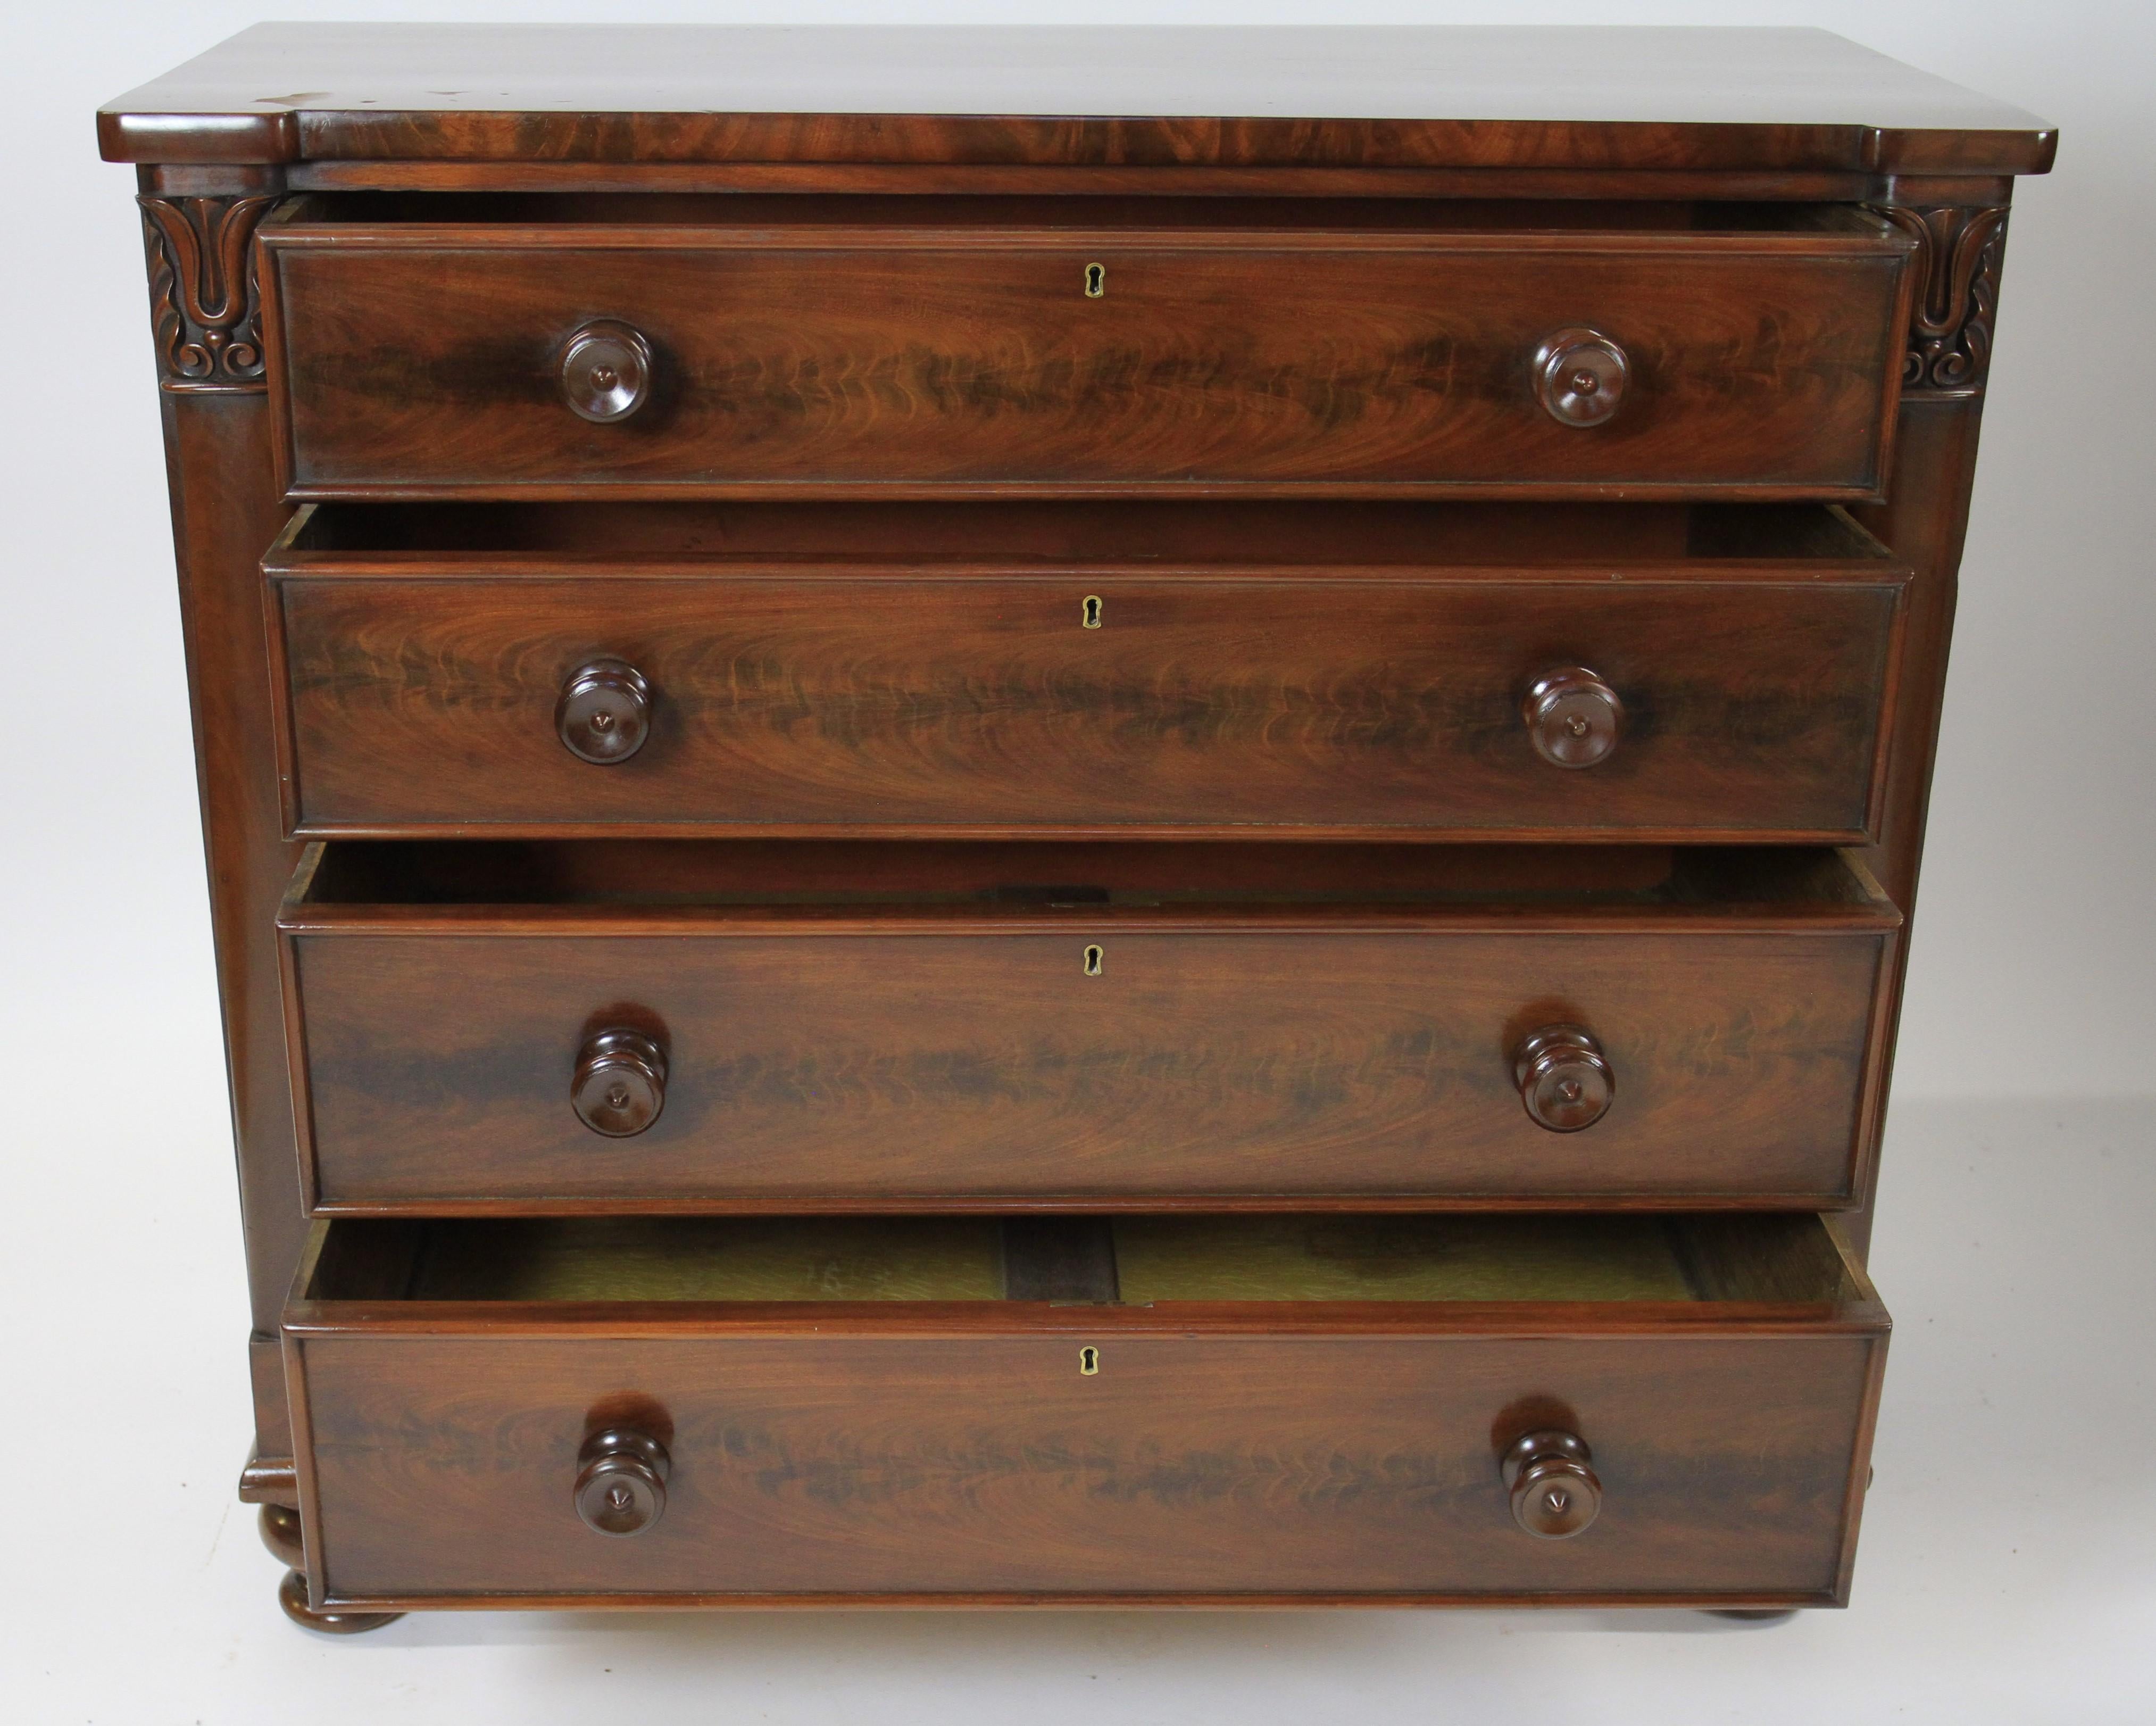 Fine W1V Period  Mahogany 4 drawer chest 
Quality Figured Mahogany veneer on top & Drawer fronts, 
Original locks, turned mahogany drawer knobs, 
Pair Pilasters with carved Tulip detail,
Shaped Frieze
Sitting On 4 Turned Mahaoany Feet
Drawers with